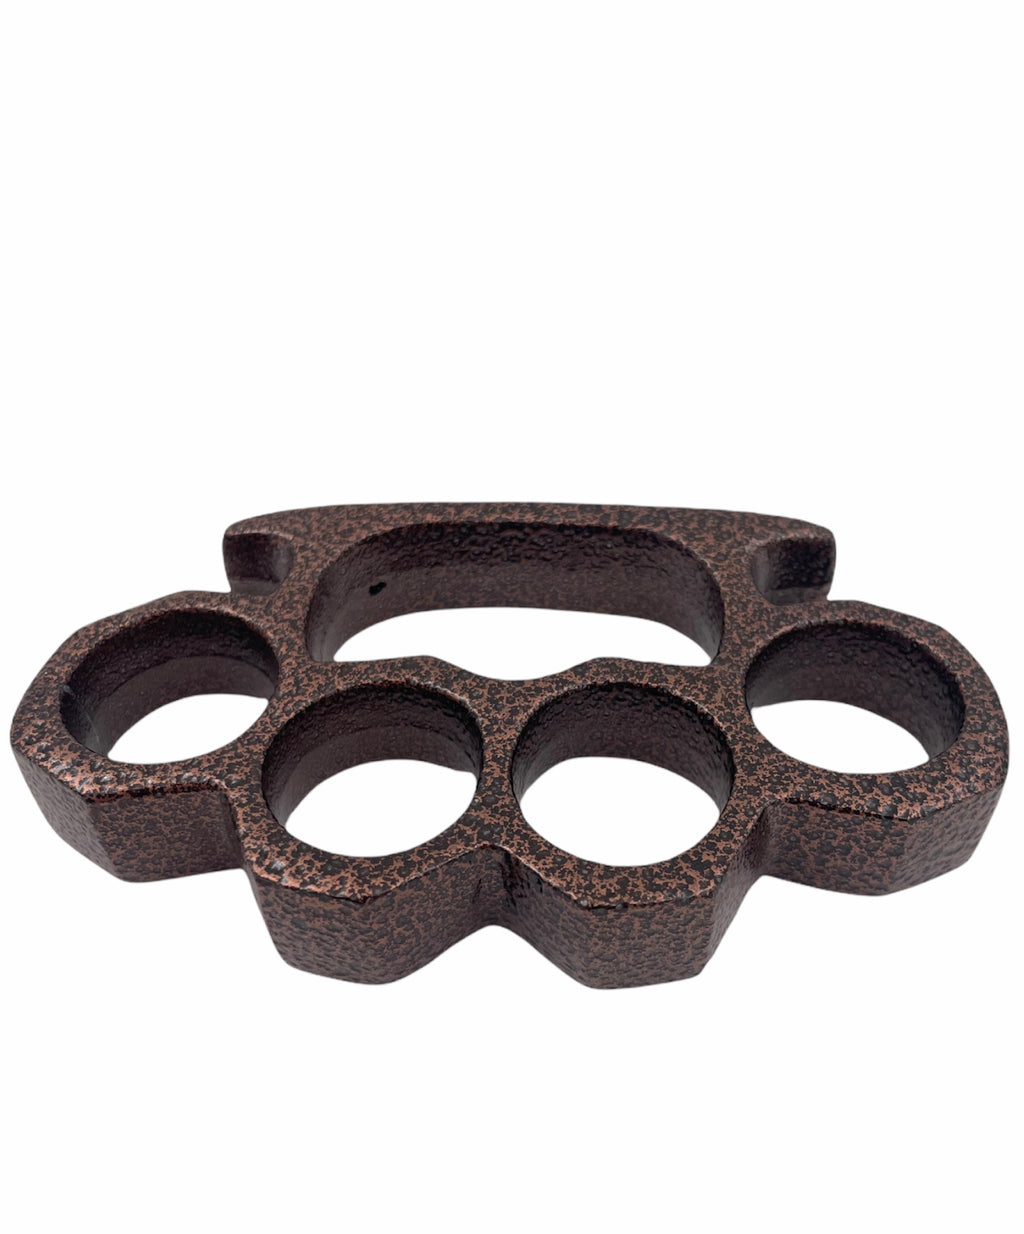 Super Heavy Duty Copper Plated Knuckle